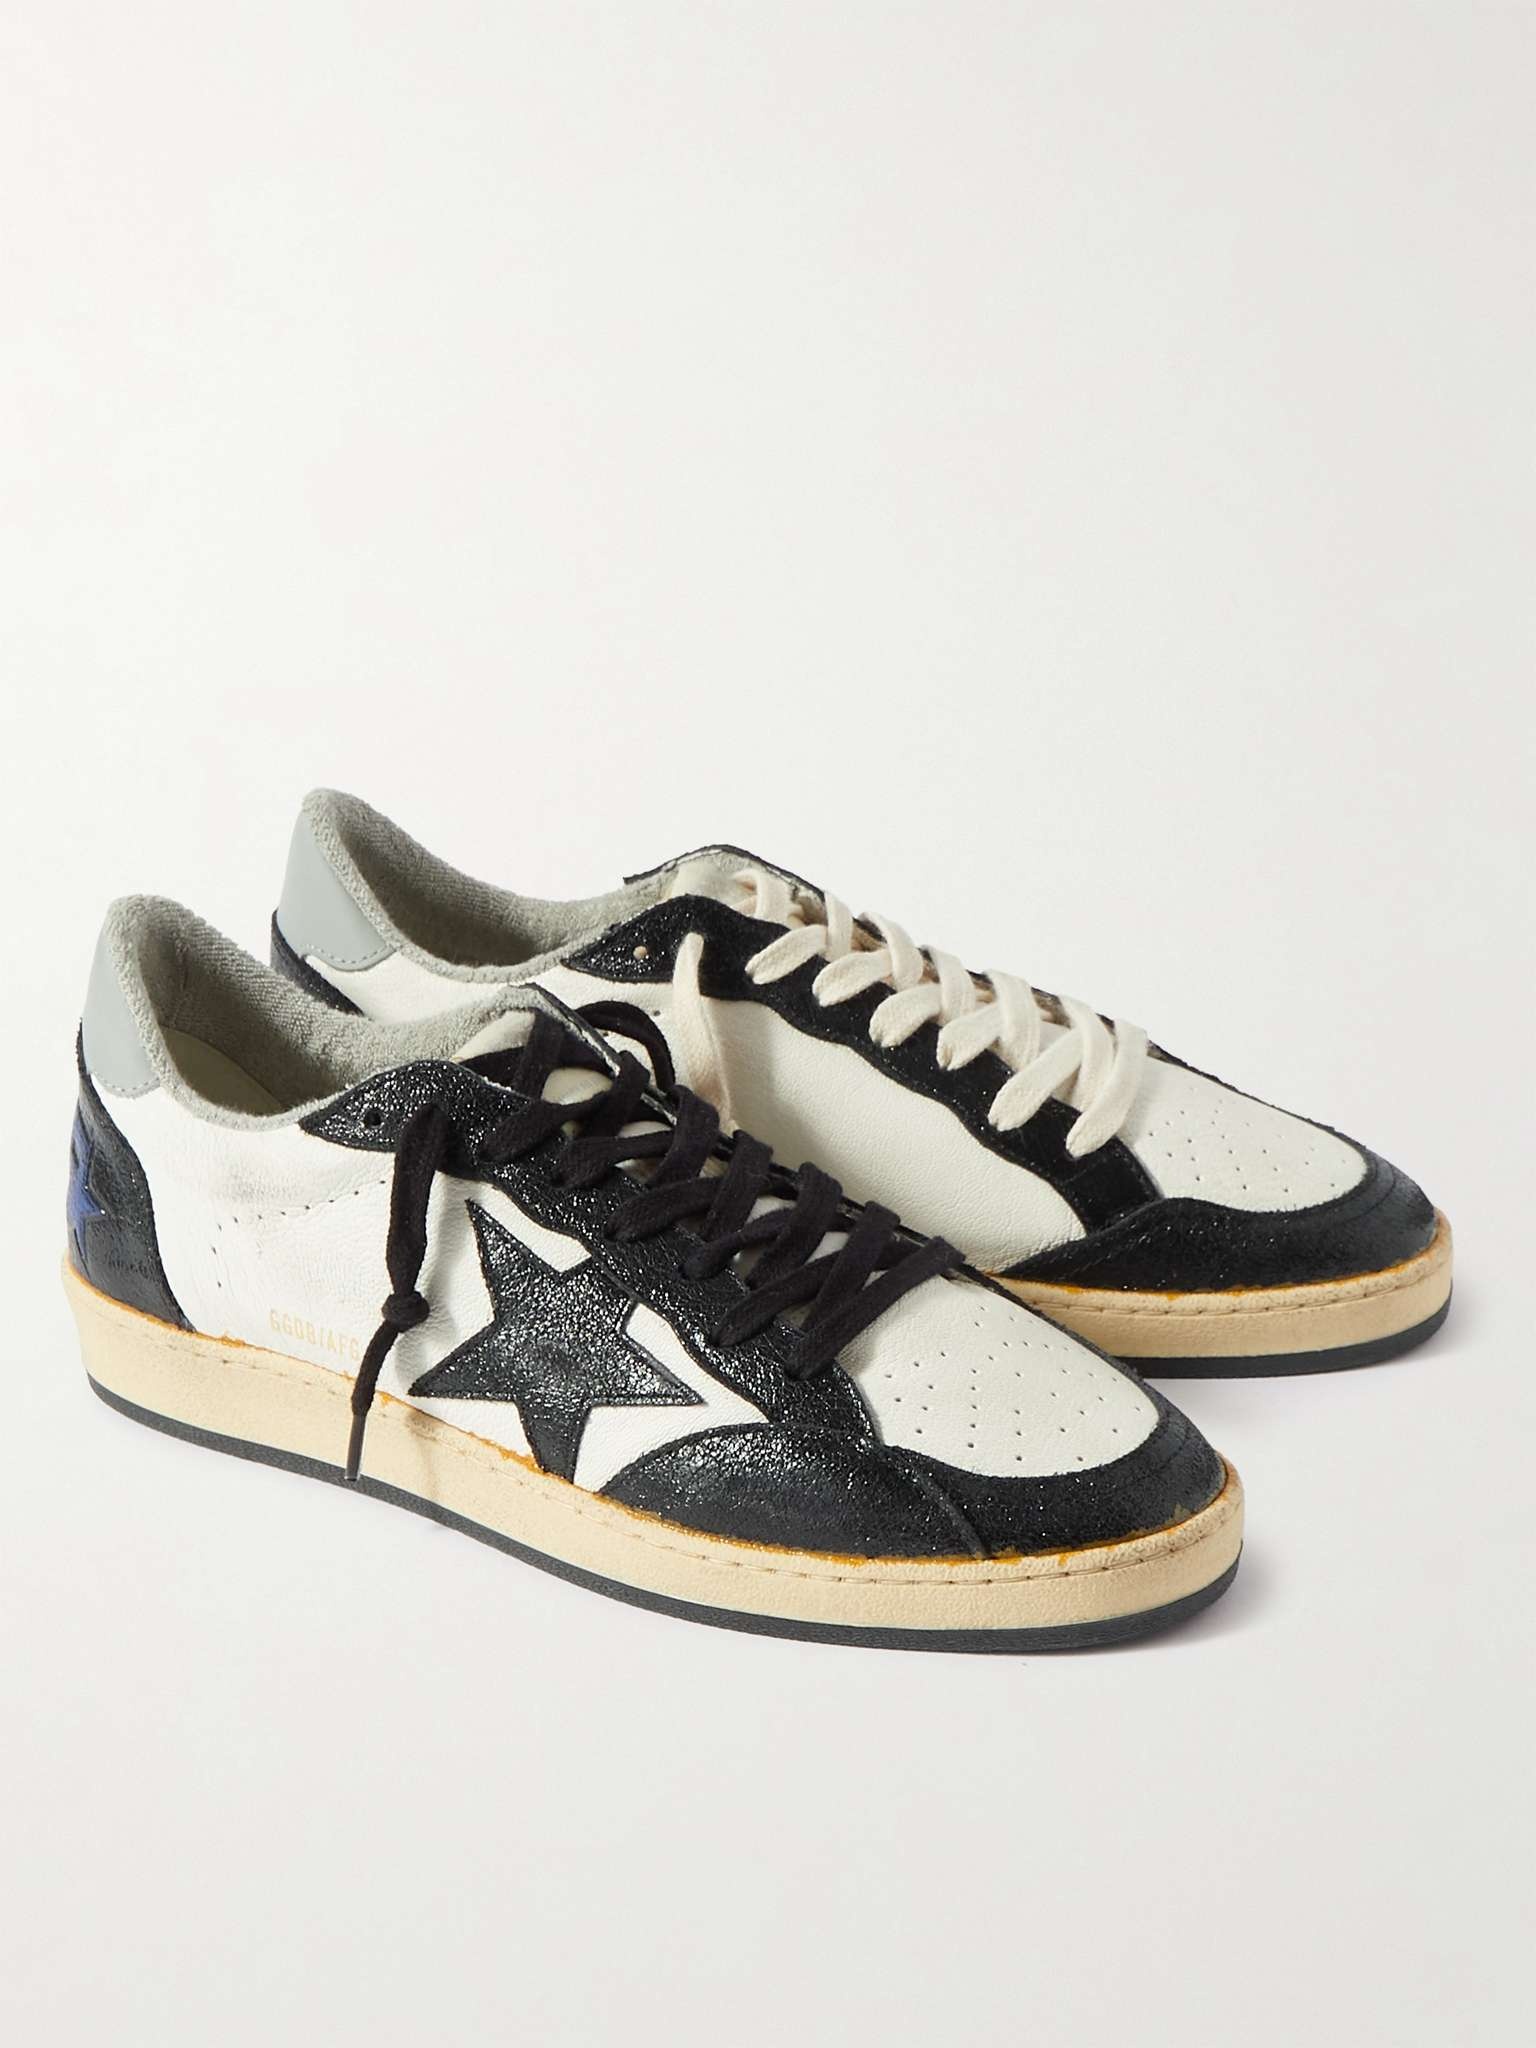 Ball Star Distressed Leather and Shell Sneakers - 4